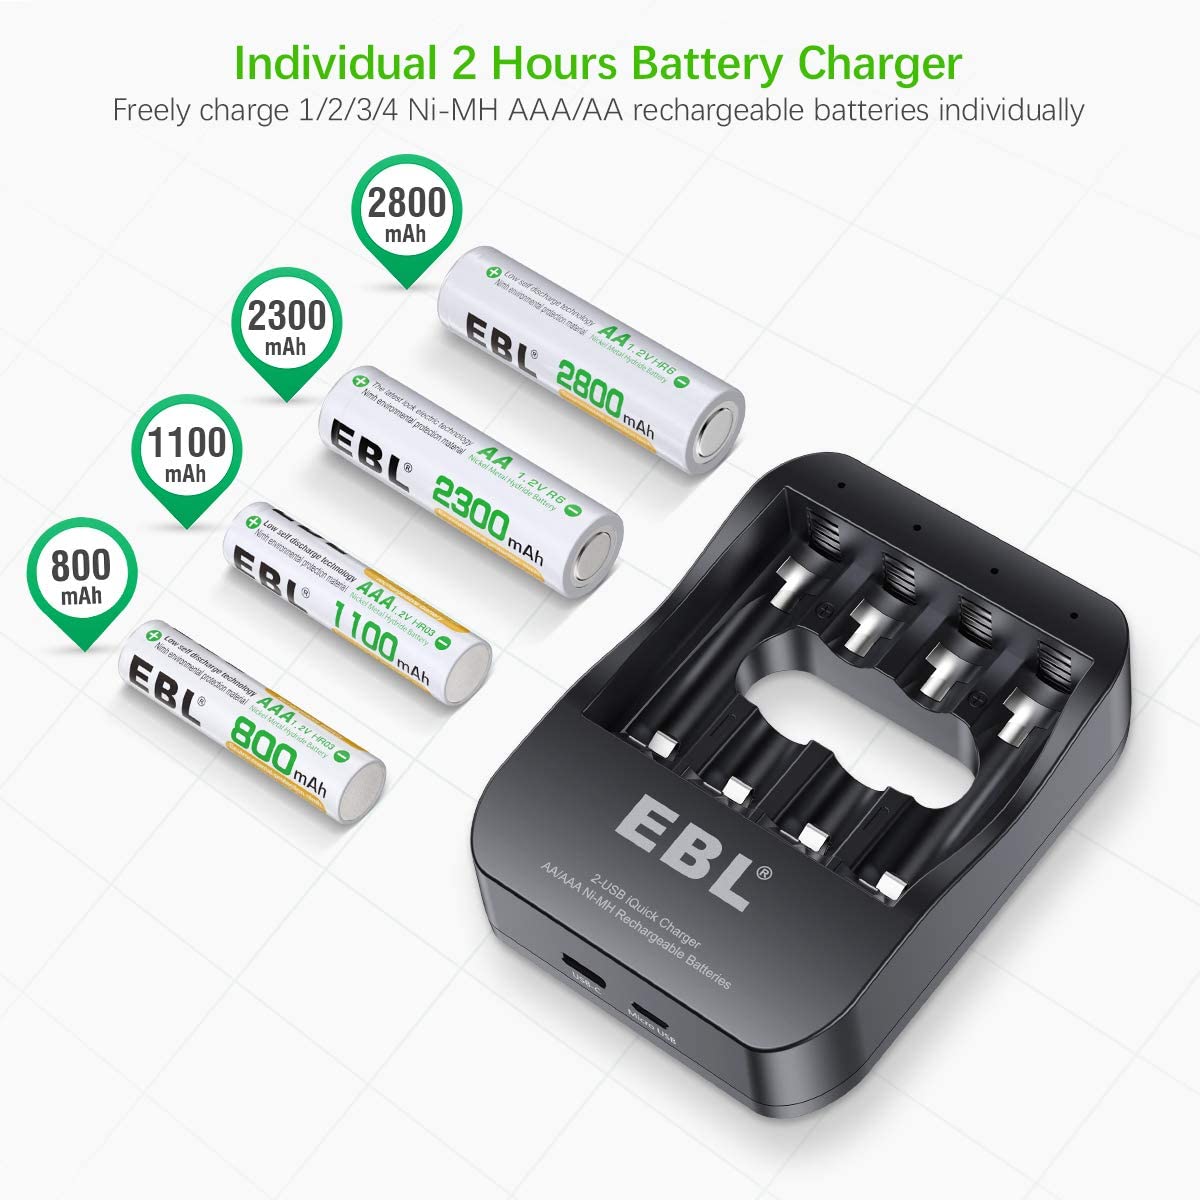 EBL AA AAA Rechargeable Batteries (4-Pack, 1100mAh + 4-Pack, 2800mAh) with  8 Bay Battery Charger for AA AAA Ni-CD Ni-MH Replacement Battery 